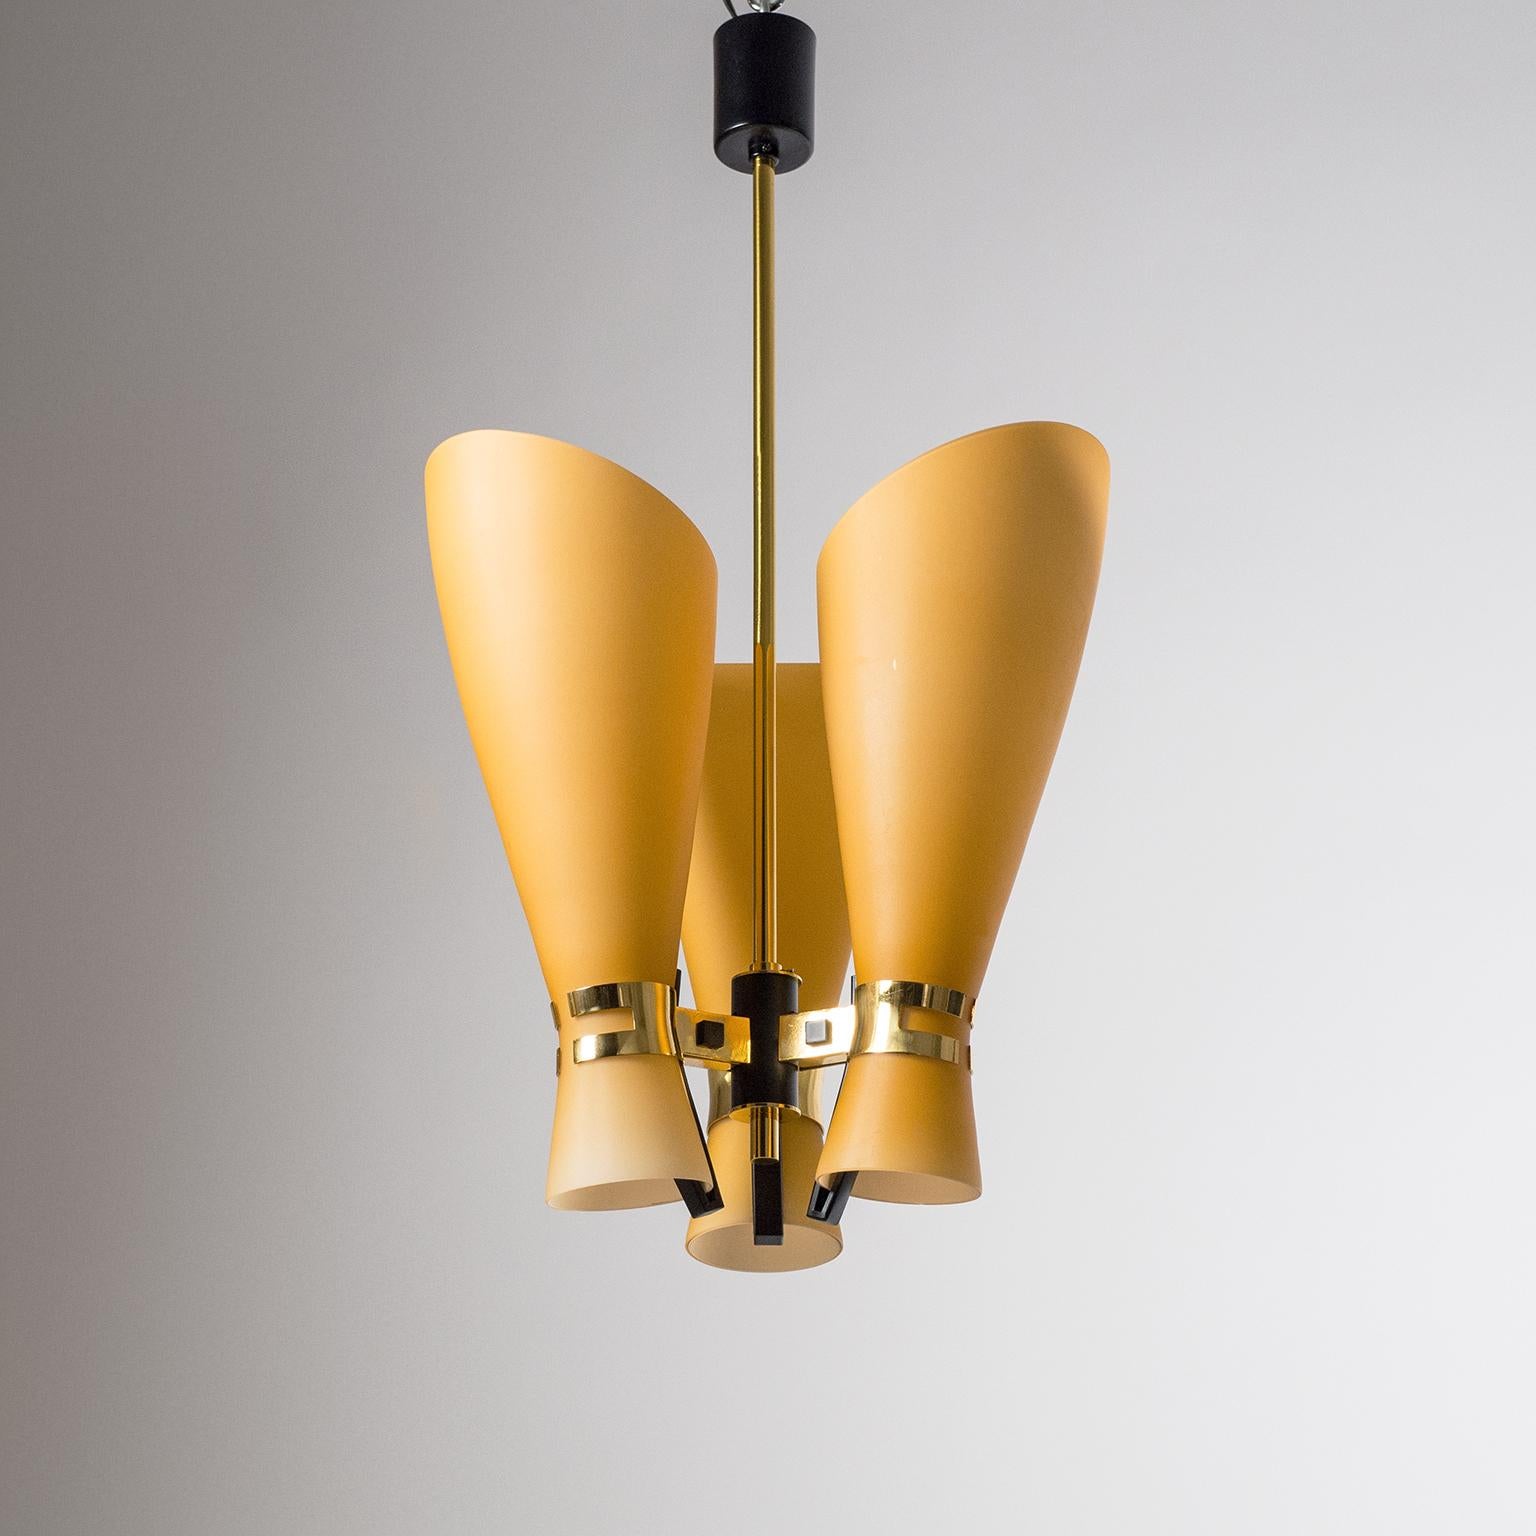 Rare Italian amber colored glass chandelier, circa 1960. Three large tapered glass diffusers are combined with minimal brass and black lacquered hardware. The blown glass diffusers are made of amber colored glass with white inner casing and satin